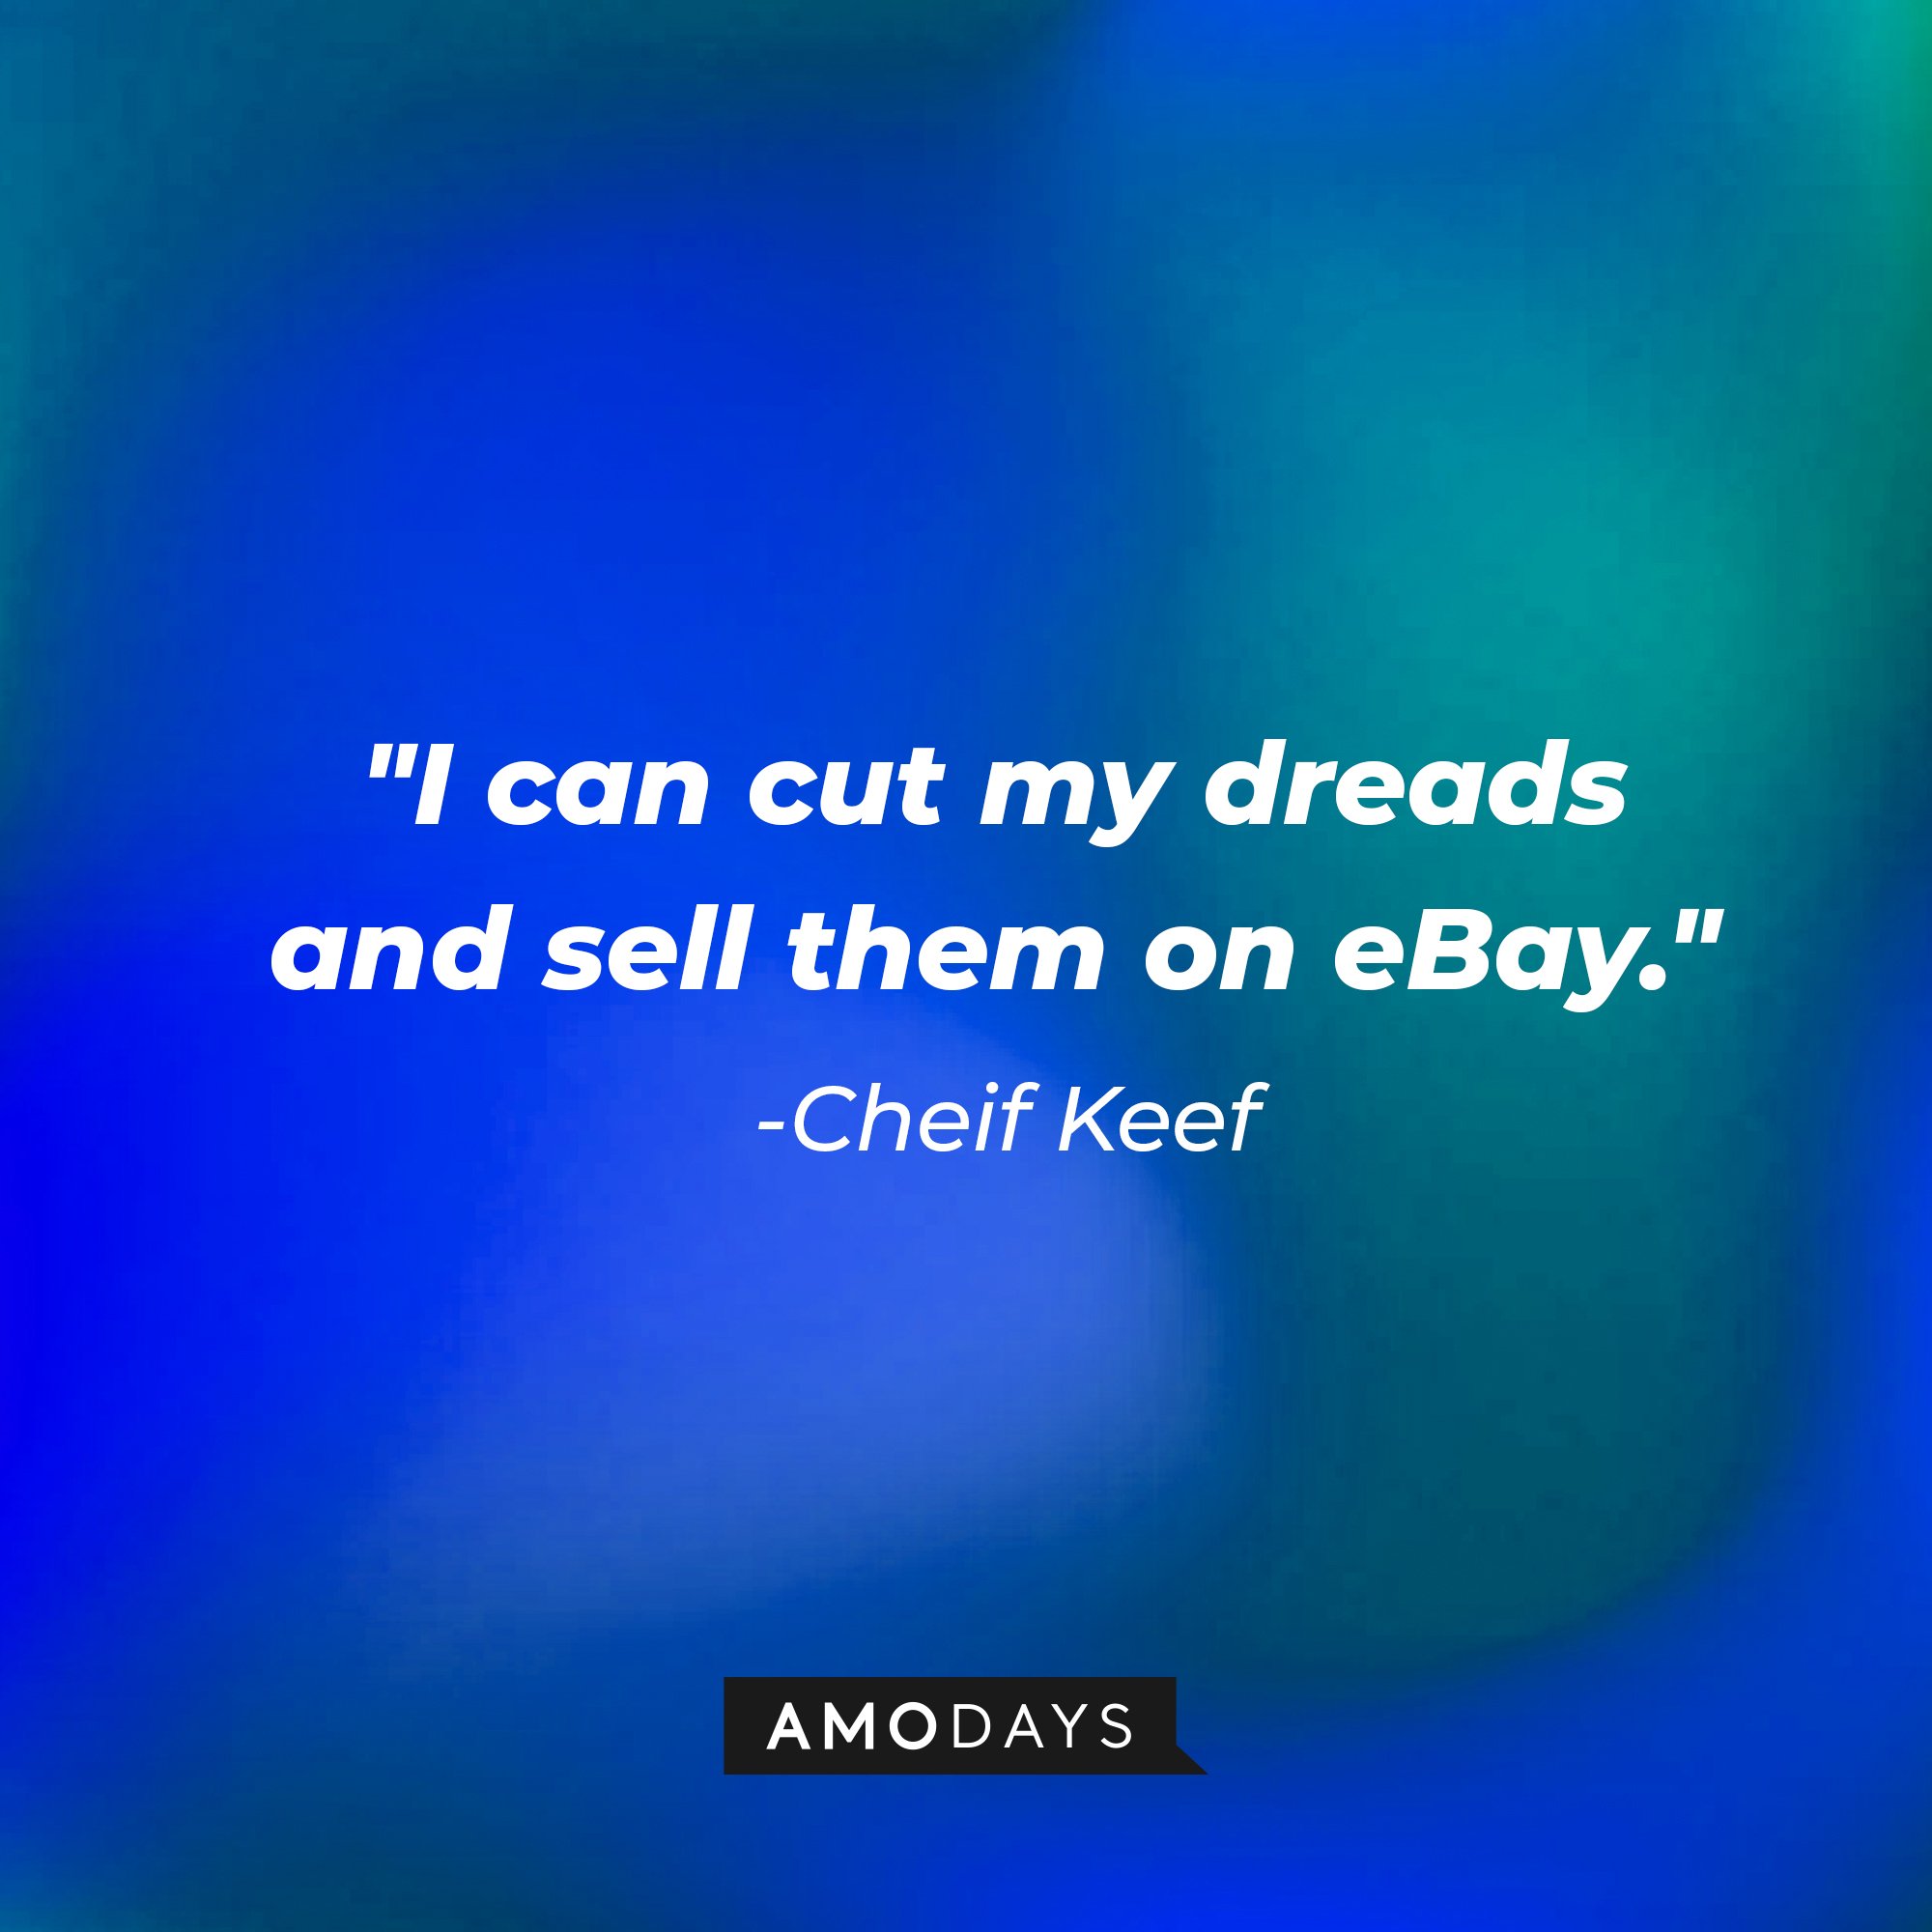 Chief Keef’s quote: "I can cut my dreads and sell them on eBay." | Image: AmoDays 